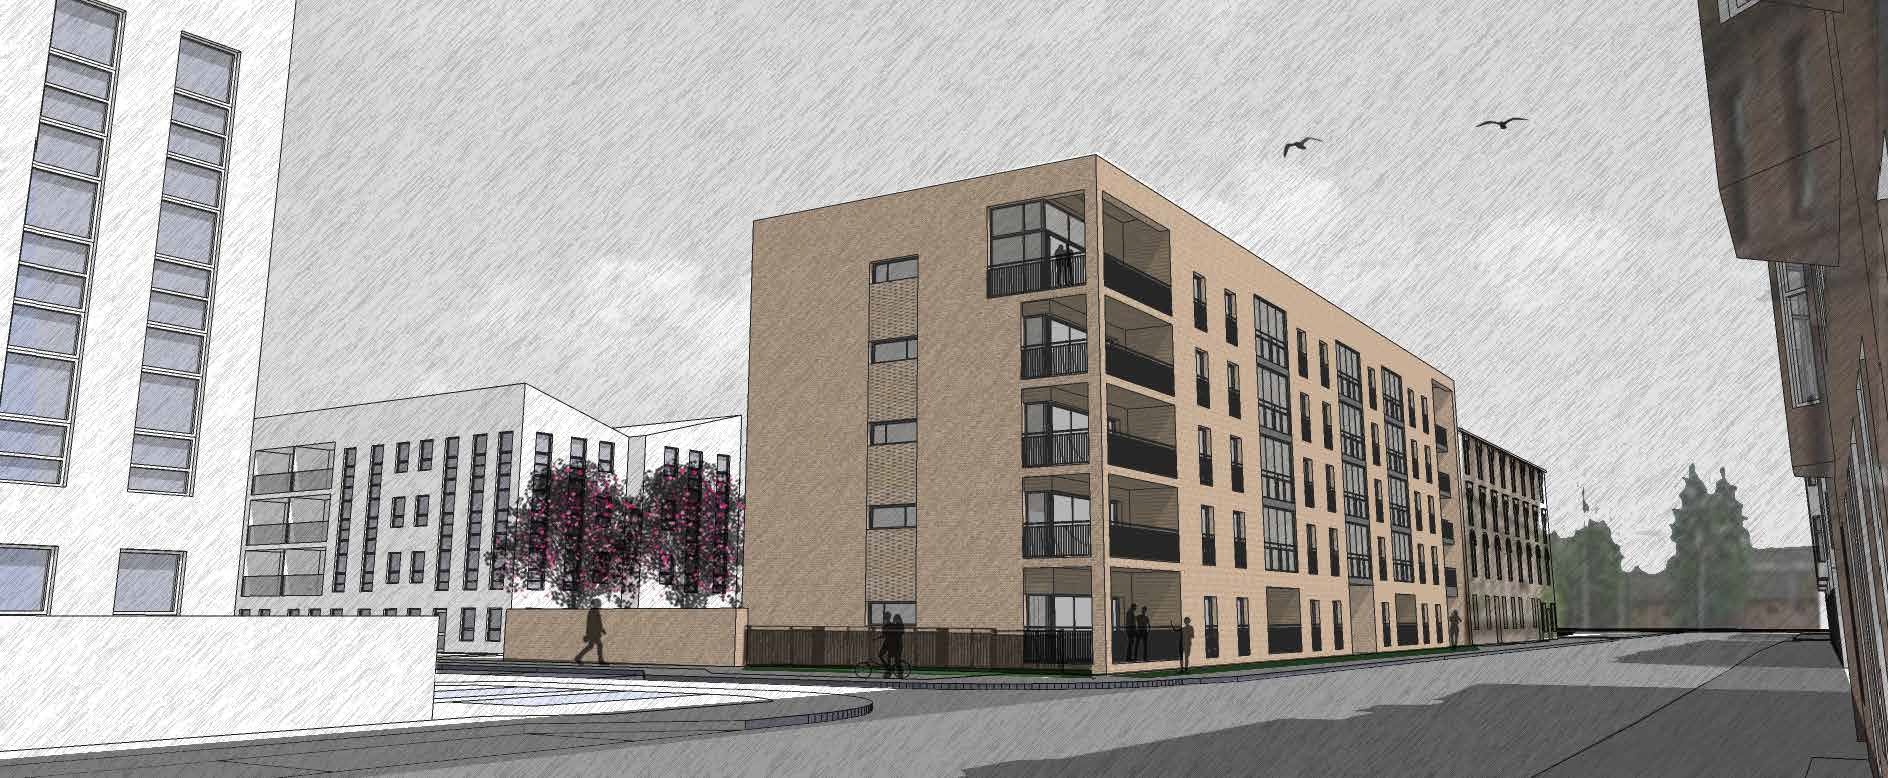 Govanhill flats plan lodged for approval